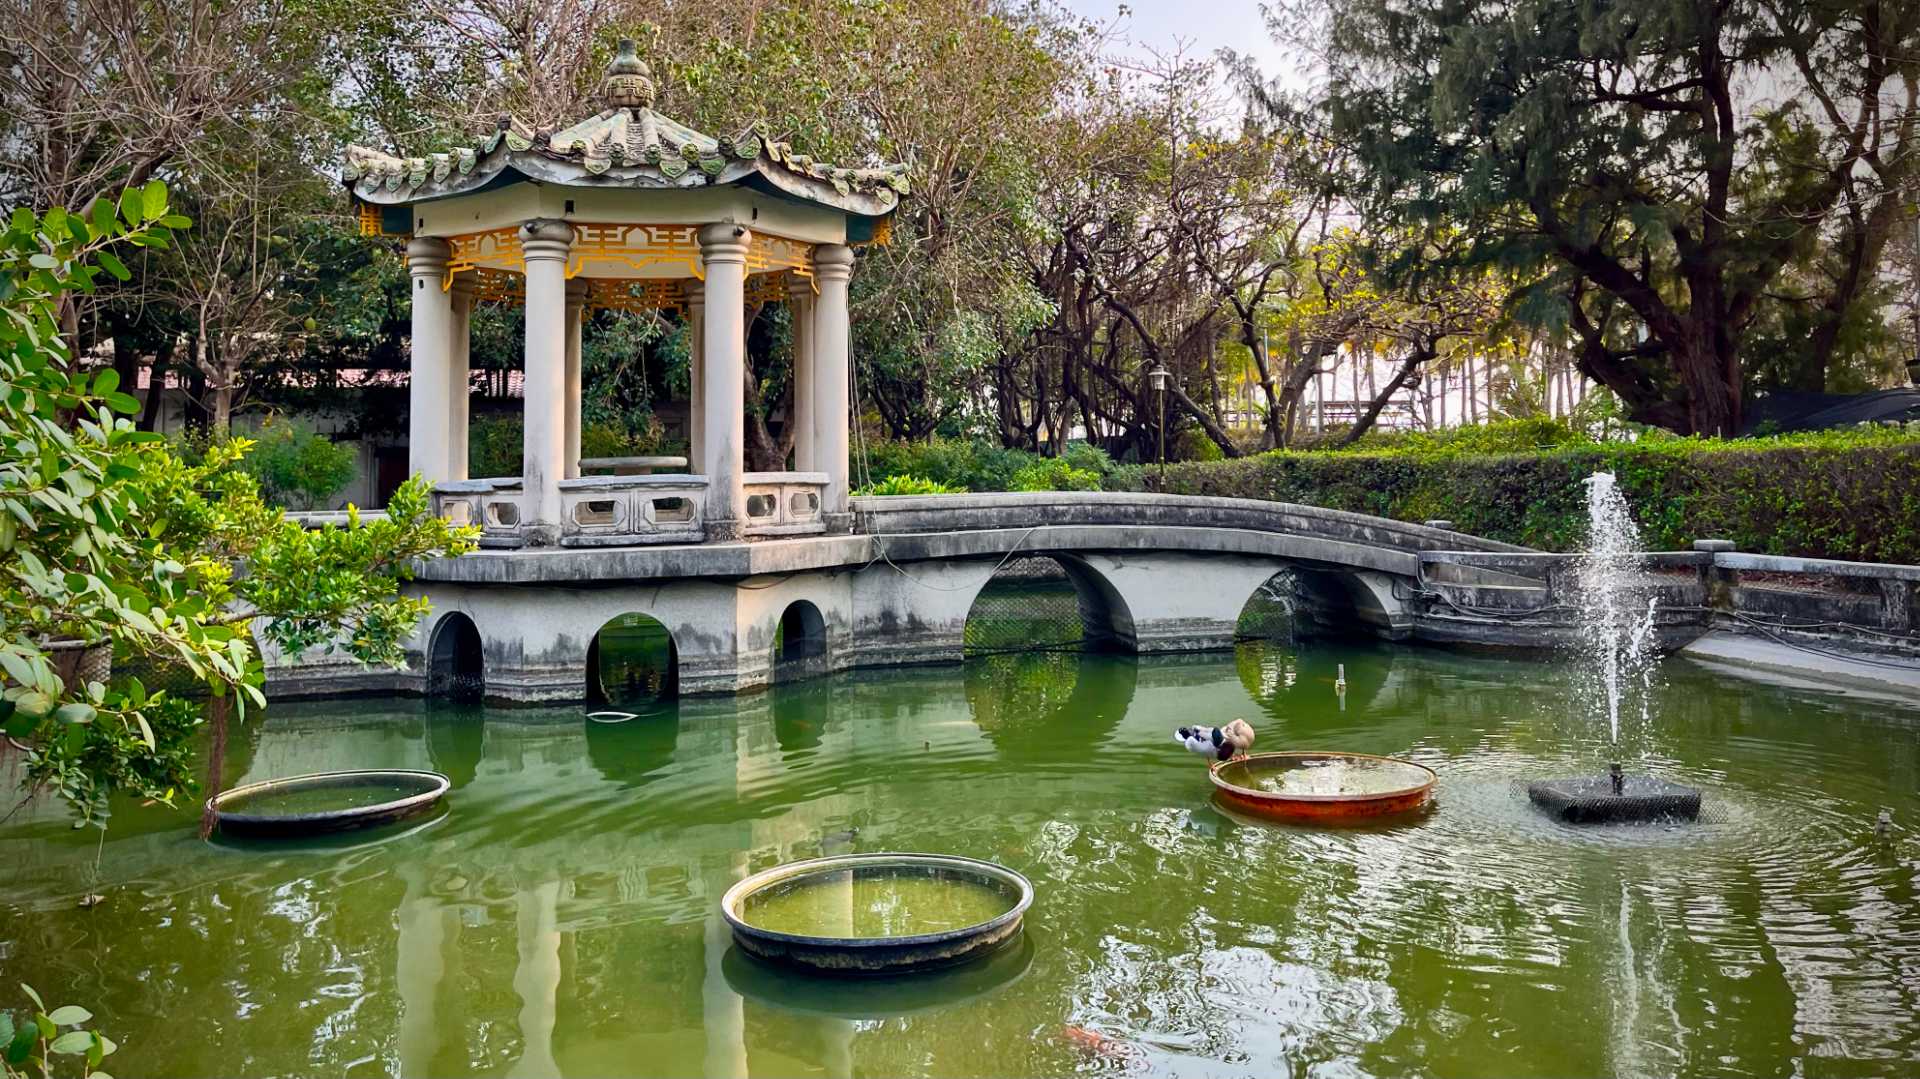 A fish pond with arched bridge and pagoda in the middle, and a fountain at right. The pond is surrounded by a green hedge and trees.